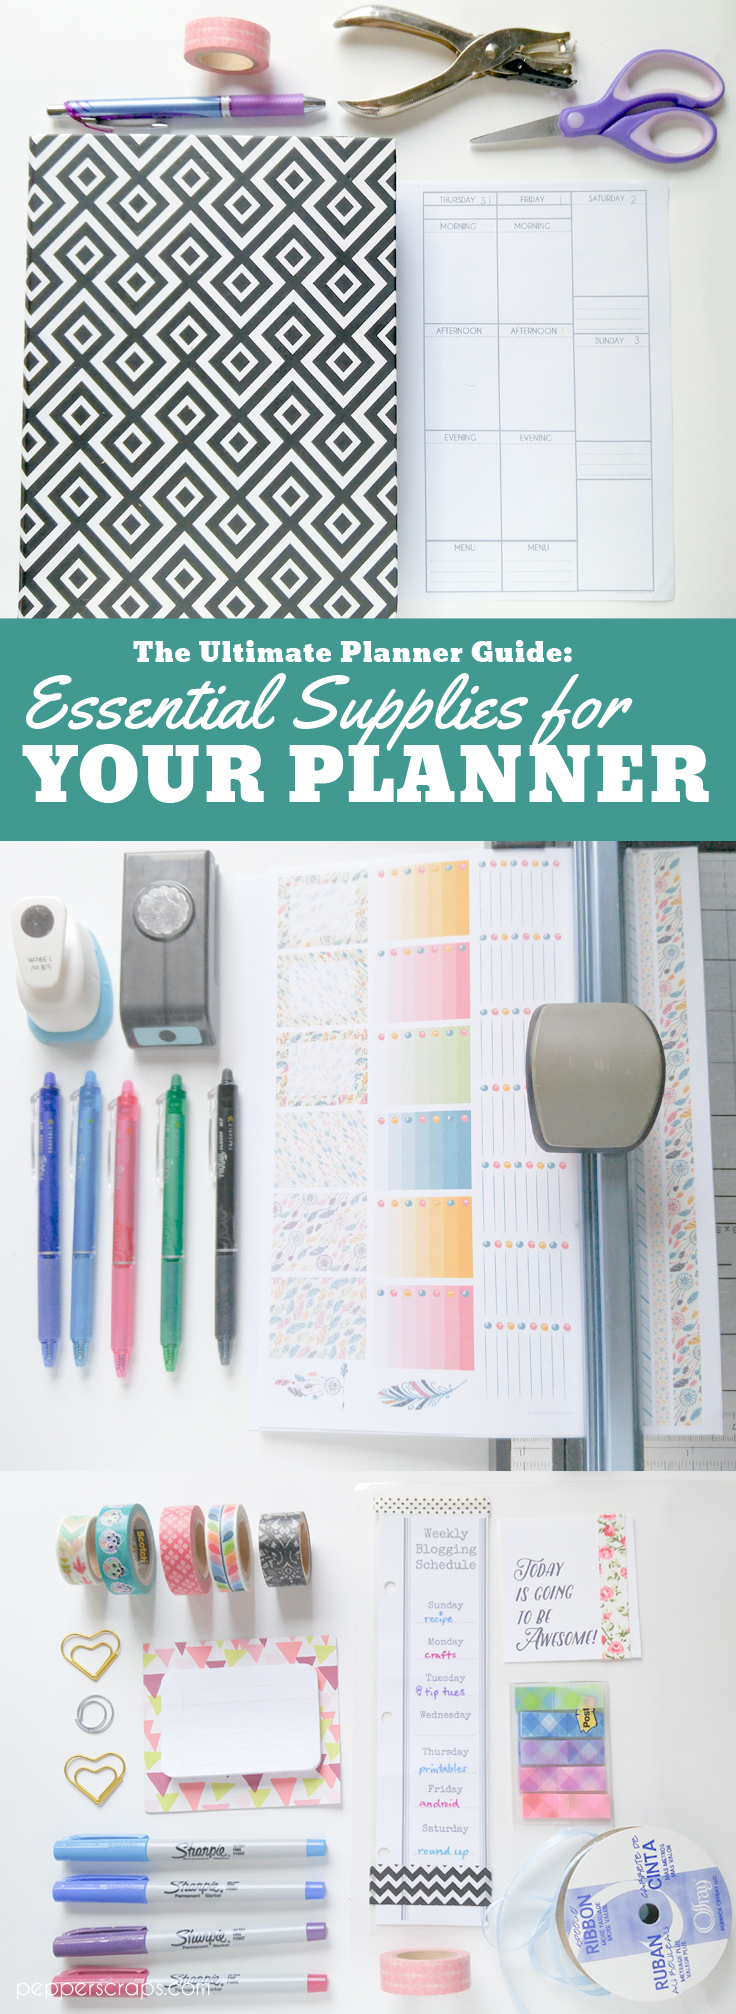 http://pepperscraps.com/wp-content/uploads/2015/10/The-Ultimate-Planner-Guide-Essential-Supplies-For-Beginning-Planner.jpg